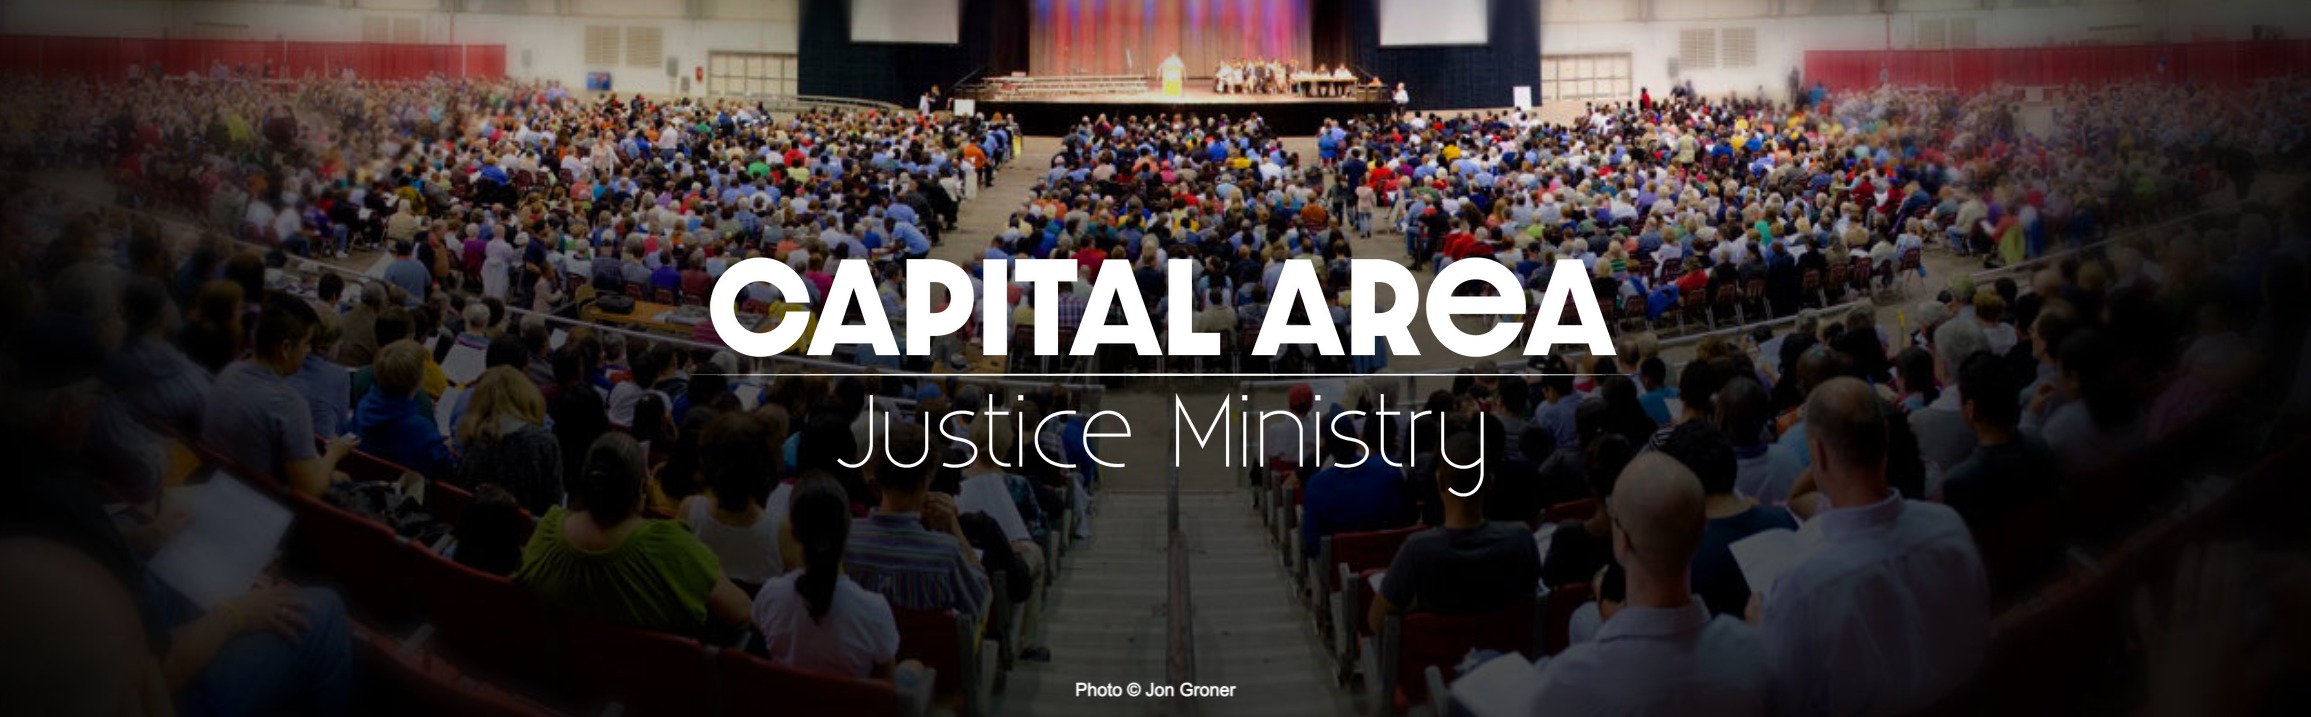 Capital Area Justice Ministry's logo on top of a photo of a large room full of people looking at a central podium